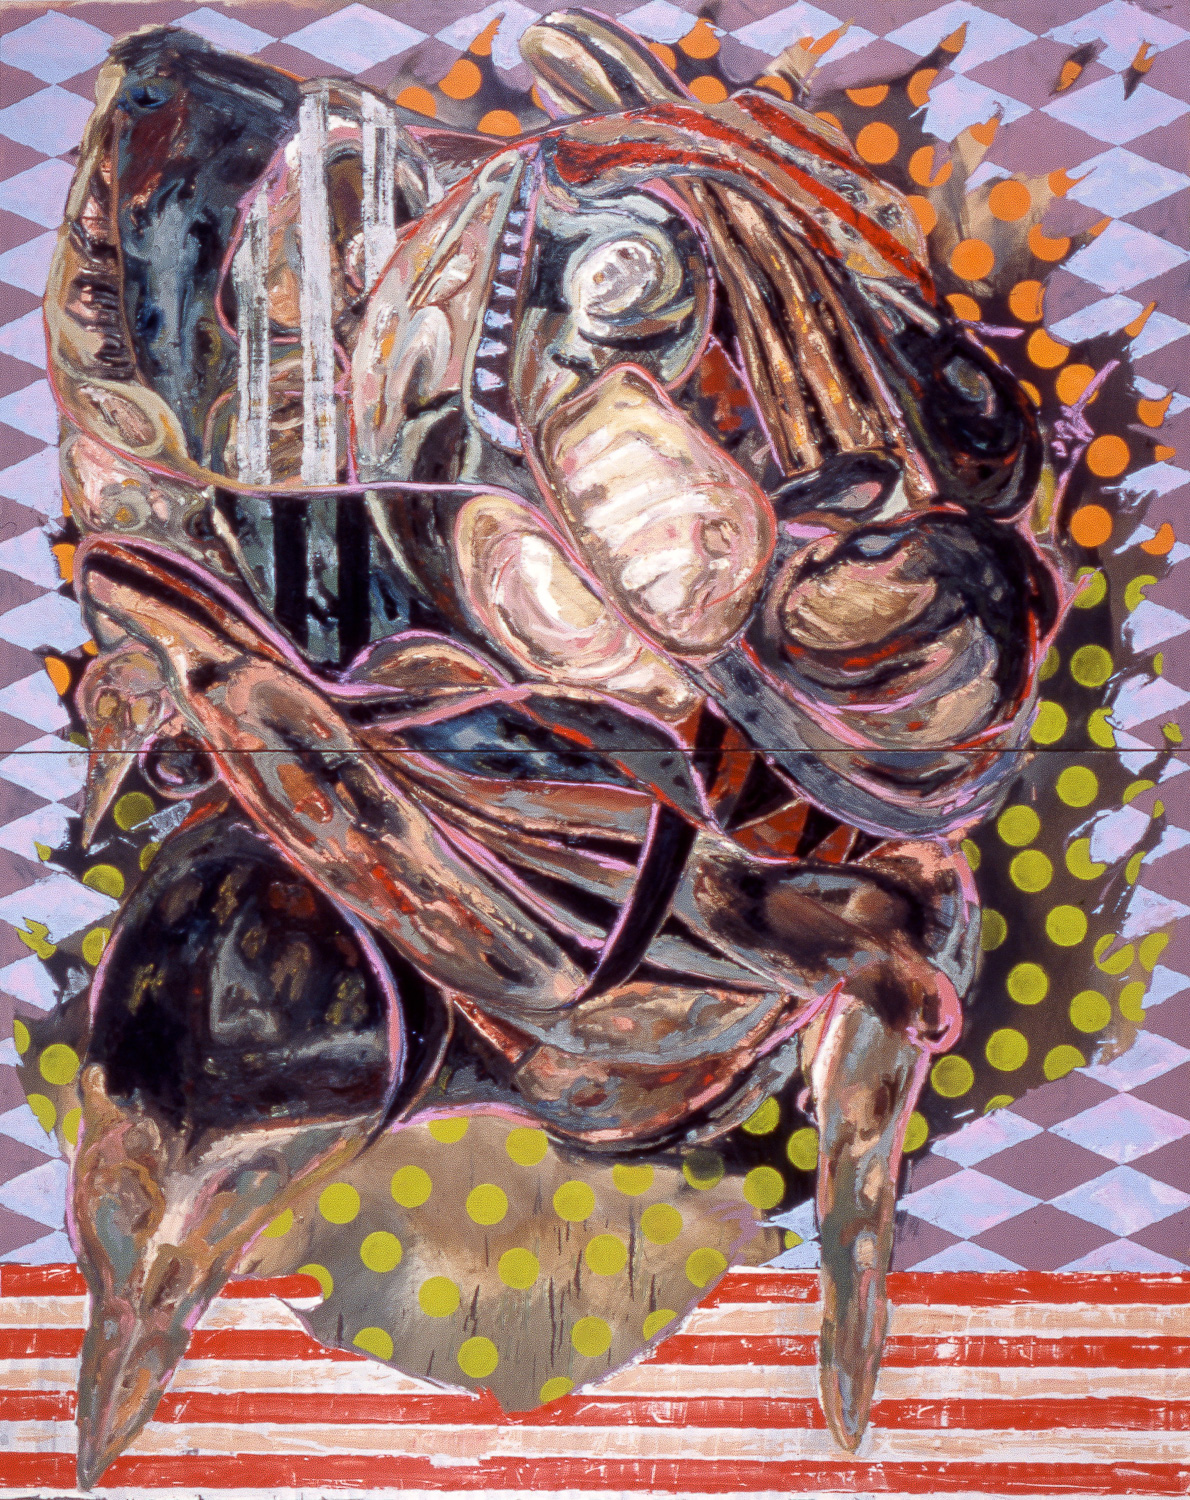    The Great Pretender , 2004   Oil on canvas   120 x 96"  